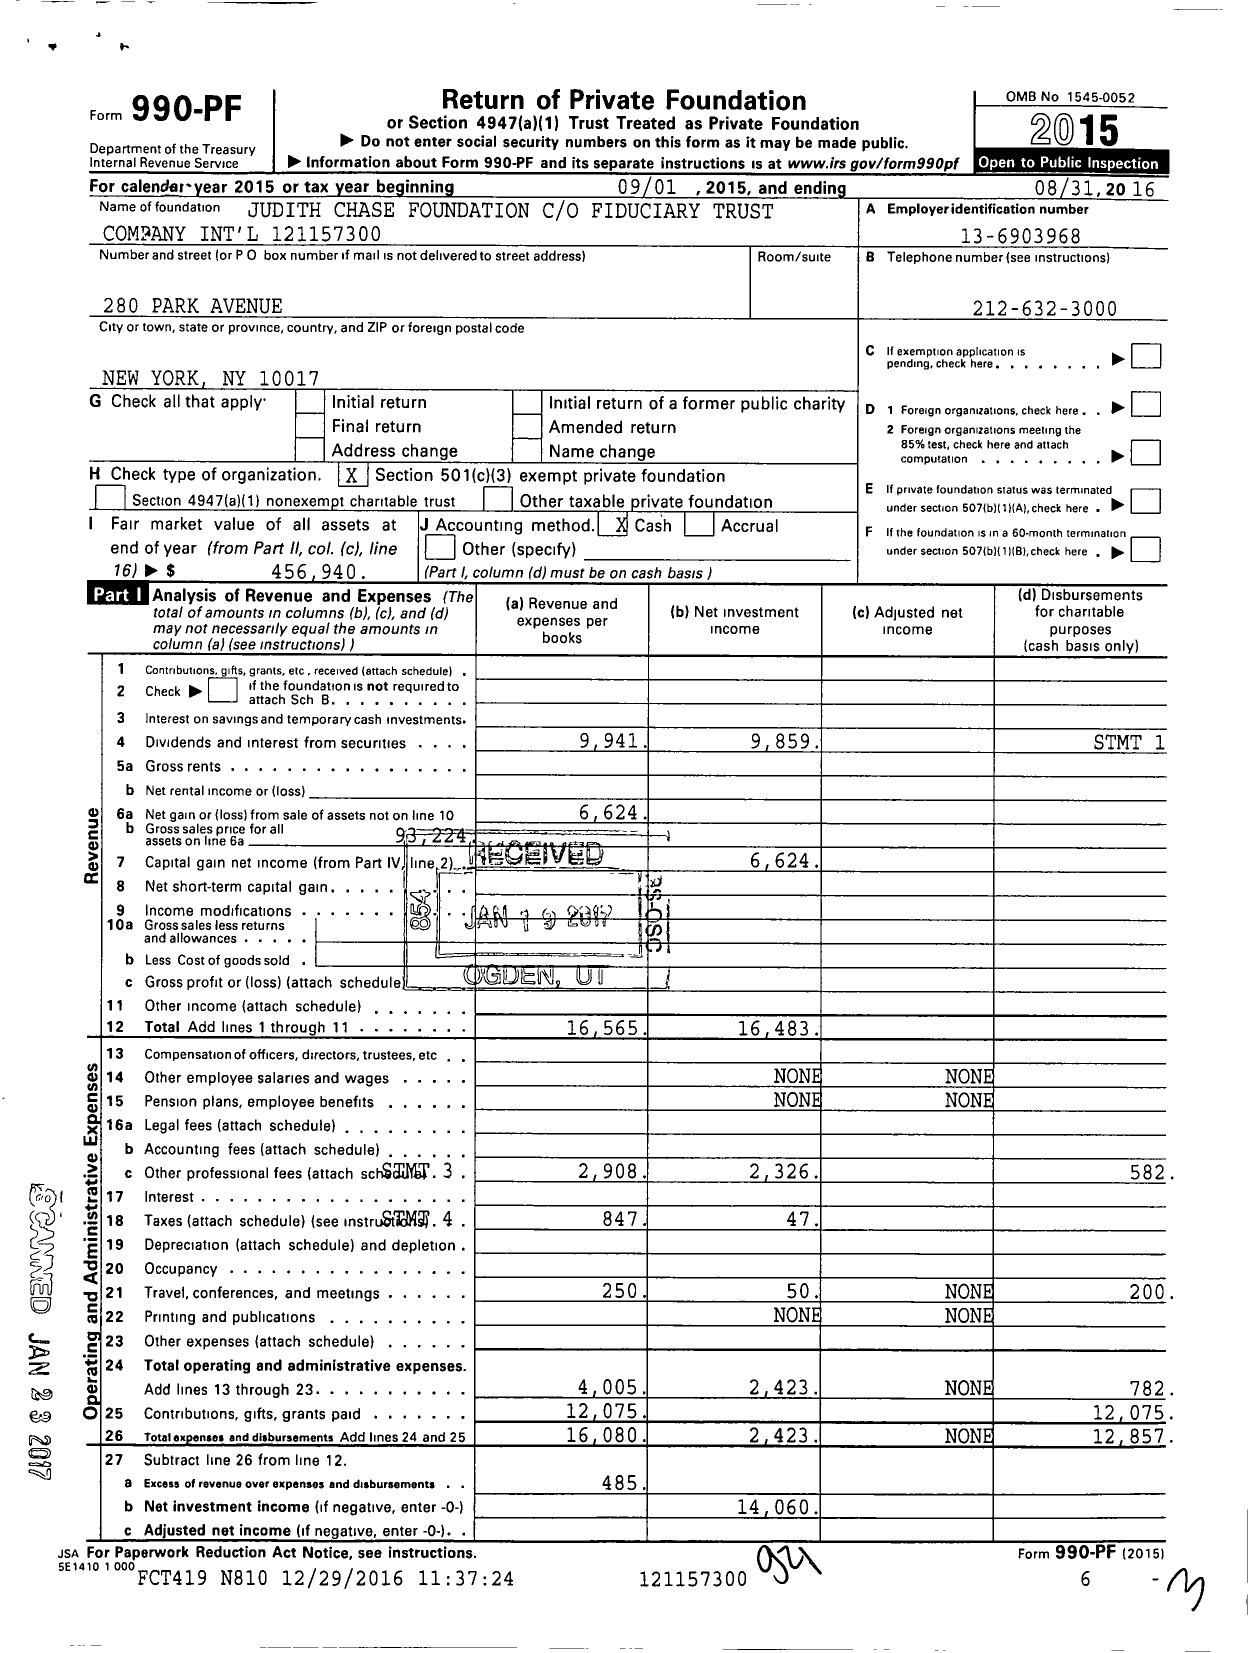 Image of first page of 2015 Form 990PF for Judith Chase Foundation Fiduciary Trust